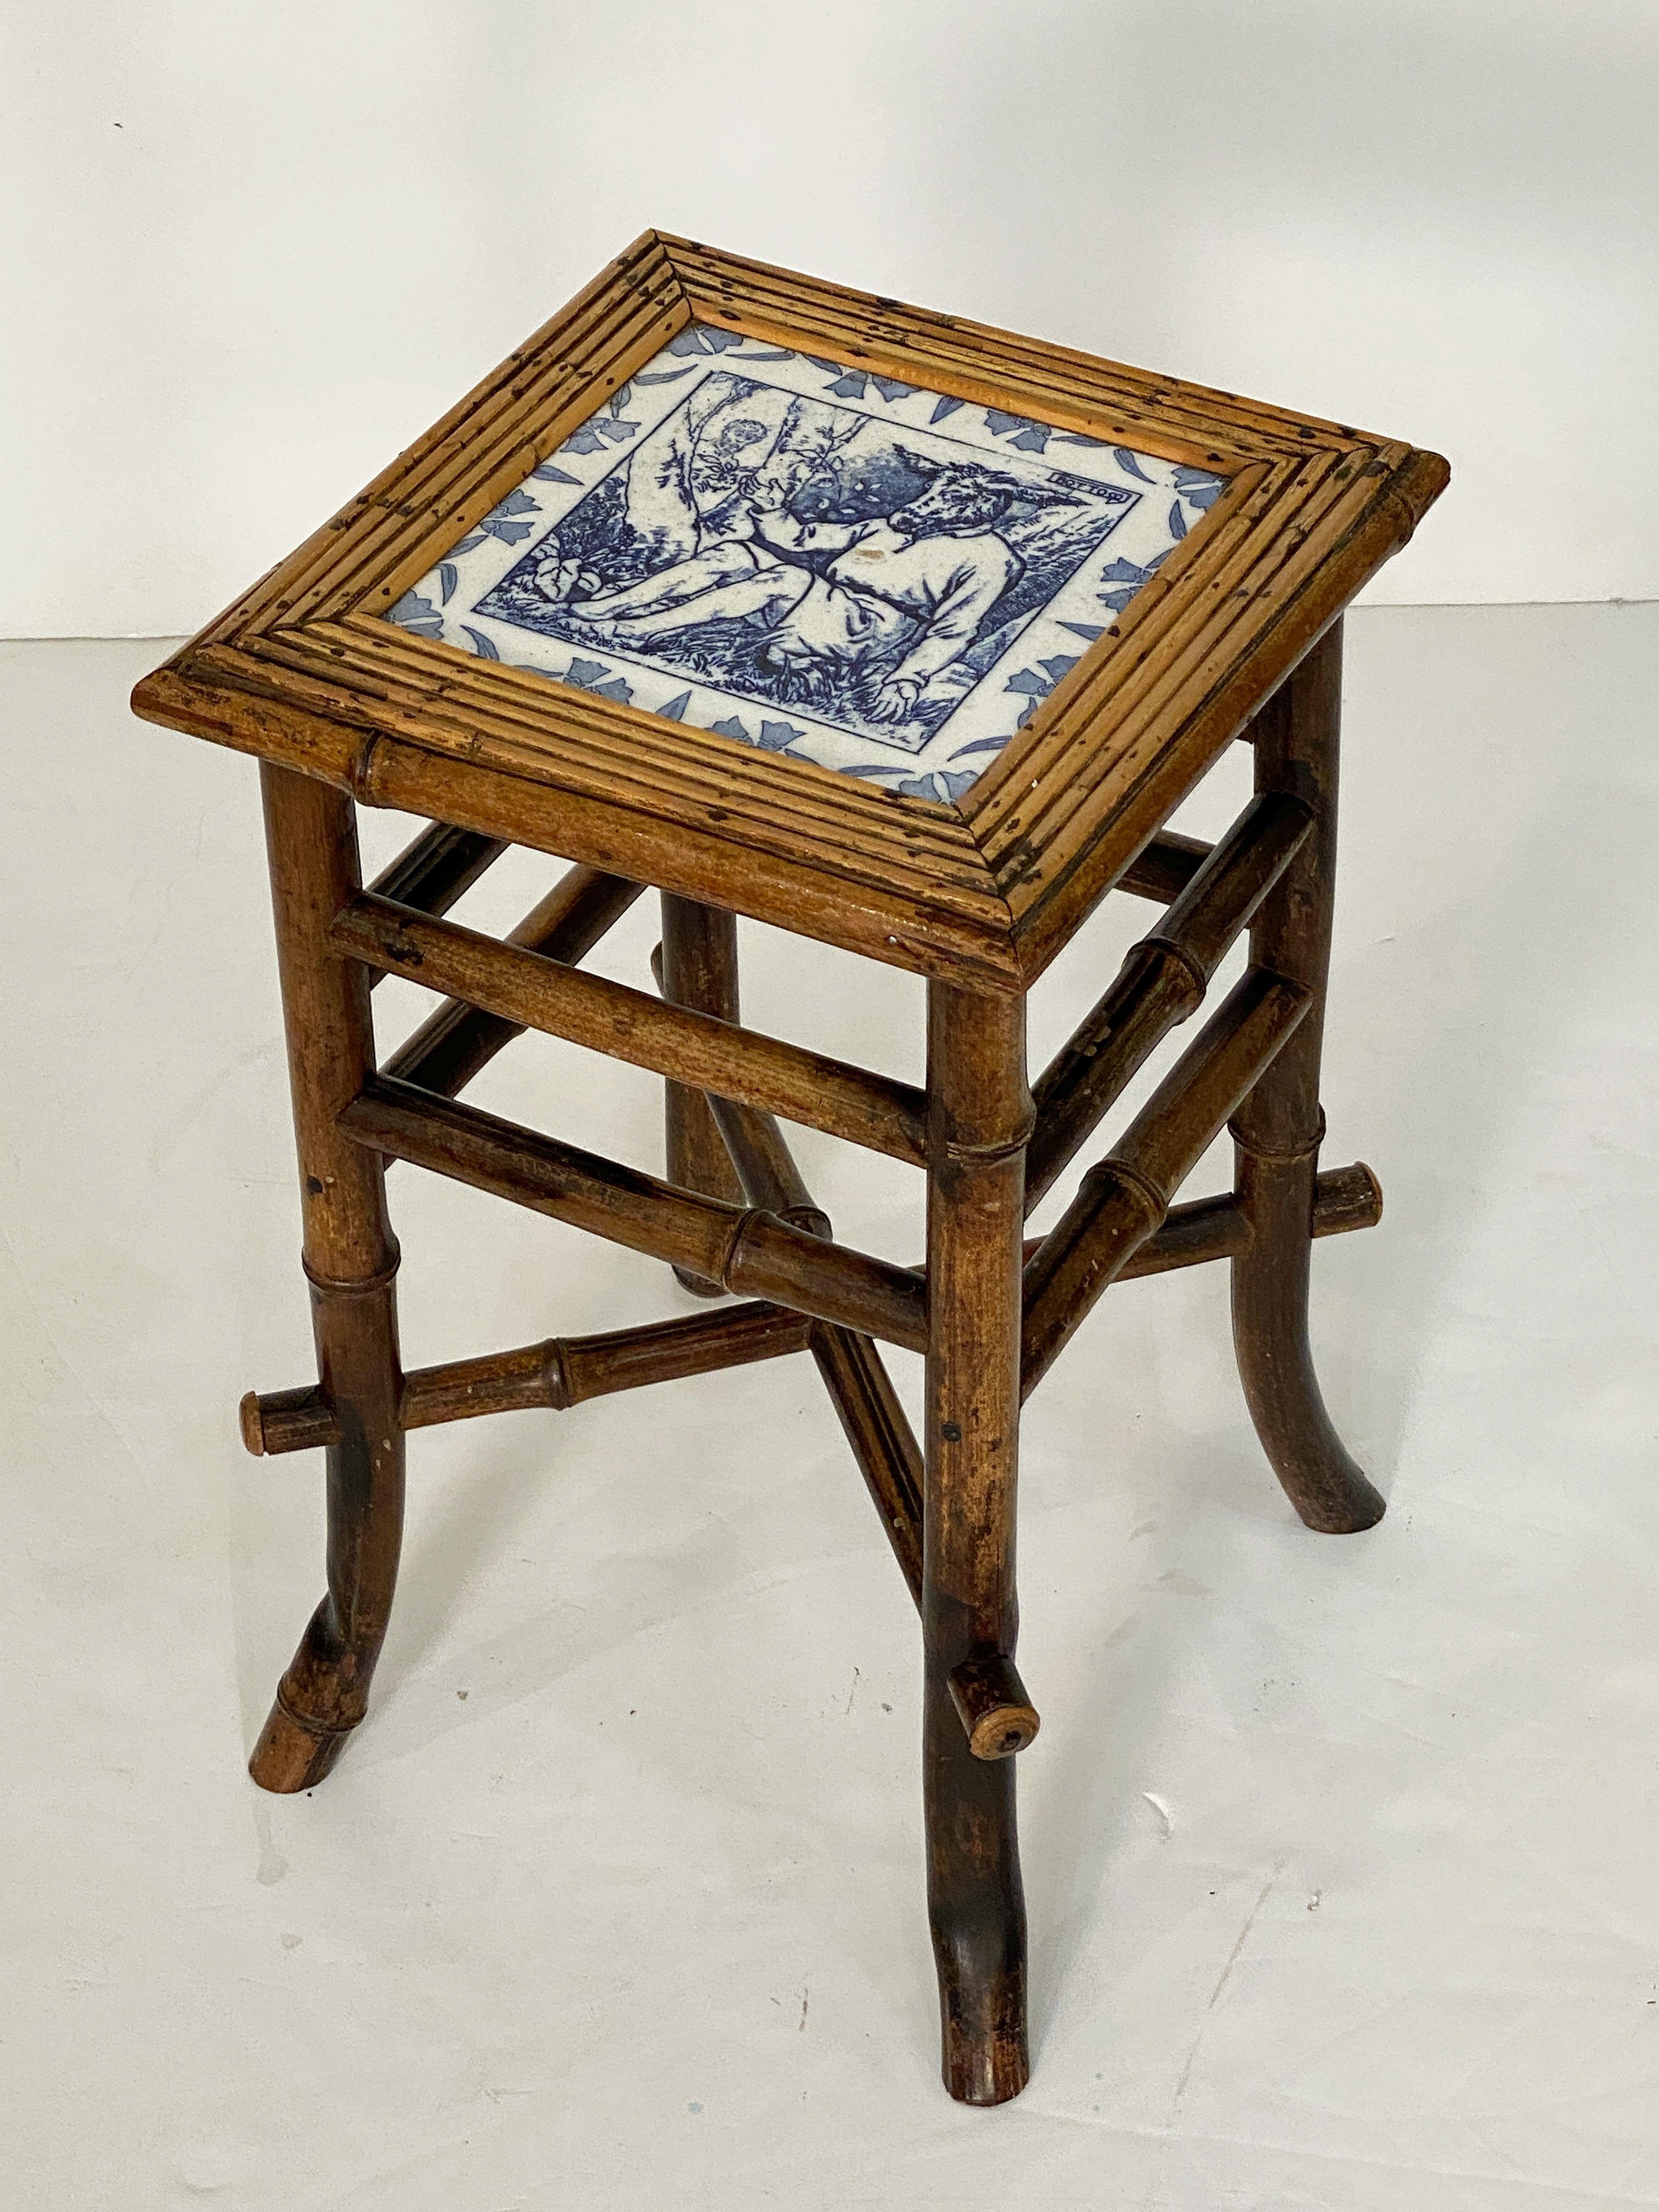 Glazed English Bamboo Table or Stool with Tile Seat from the Aesthetic Movement Era For Sale